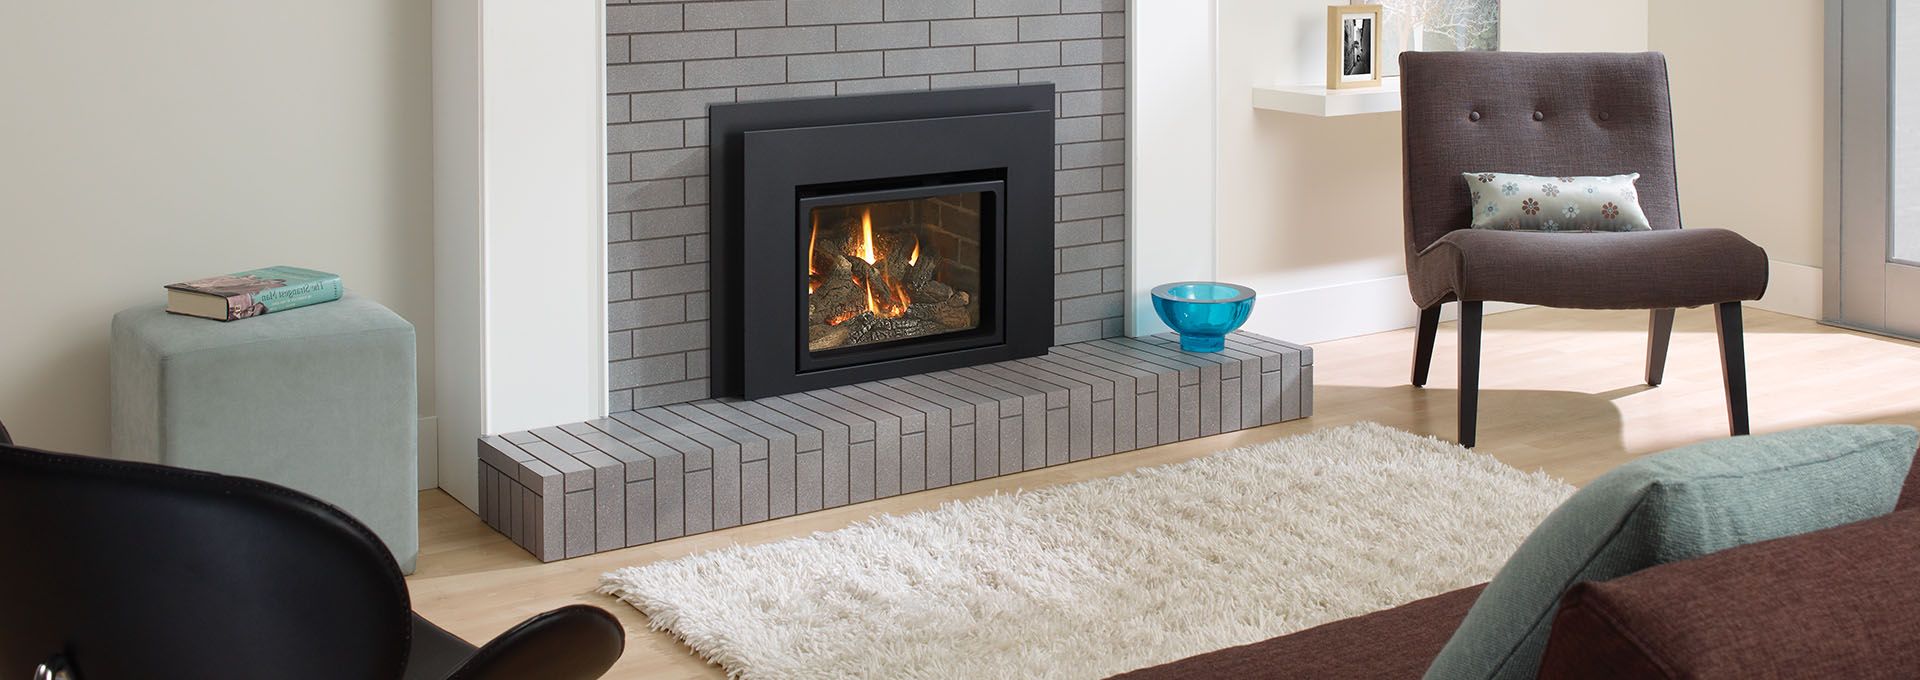 Slim Fireplace Elegant Liberty Collection Fireplace by Regency Available Through